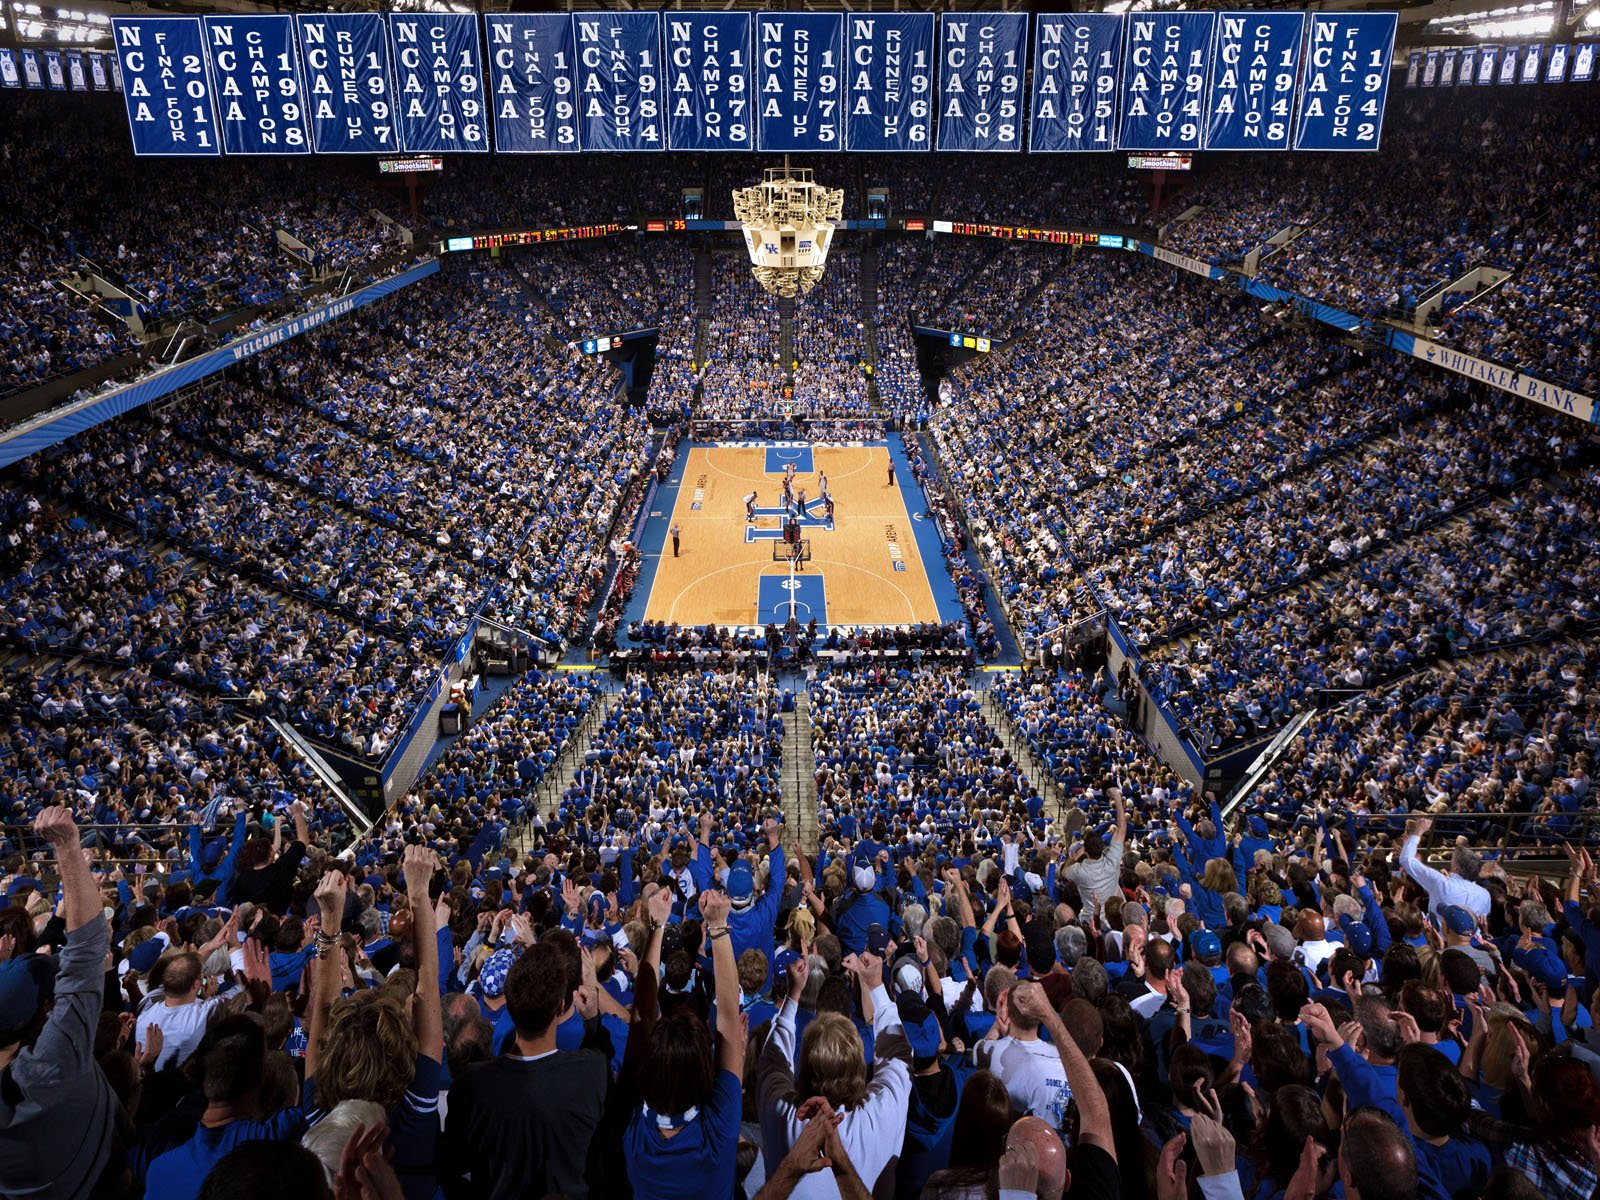 See all the University of Kentucky wallpapers at ukathleticscom